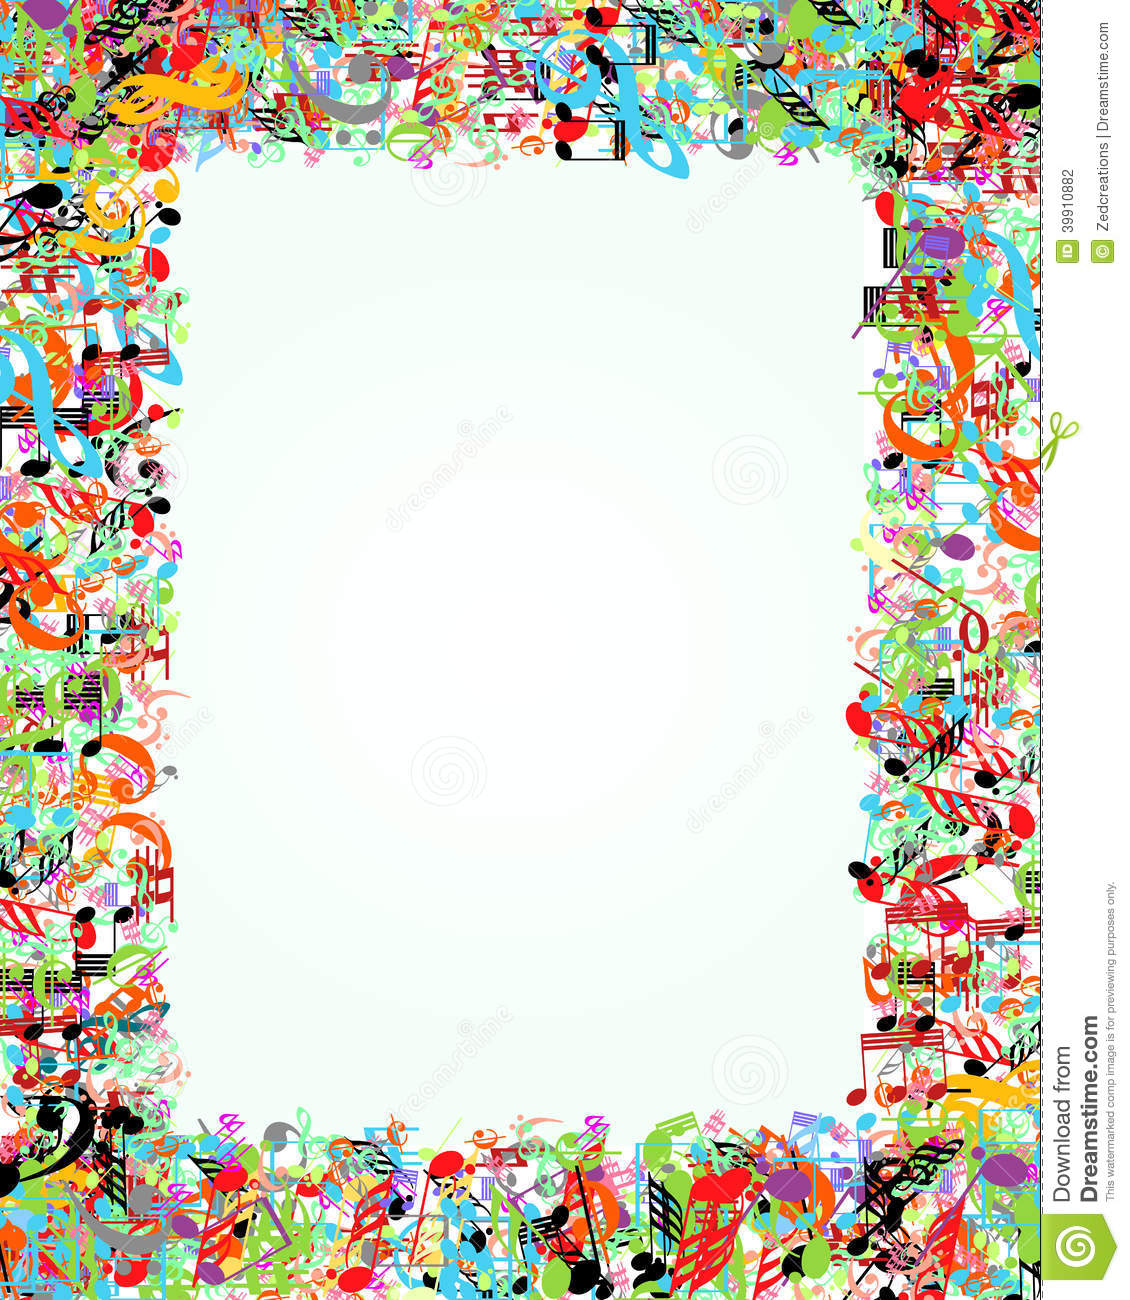 Multi Color Square Border With Music Signs Illustration An Additional